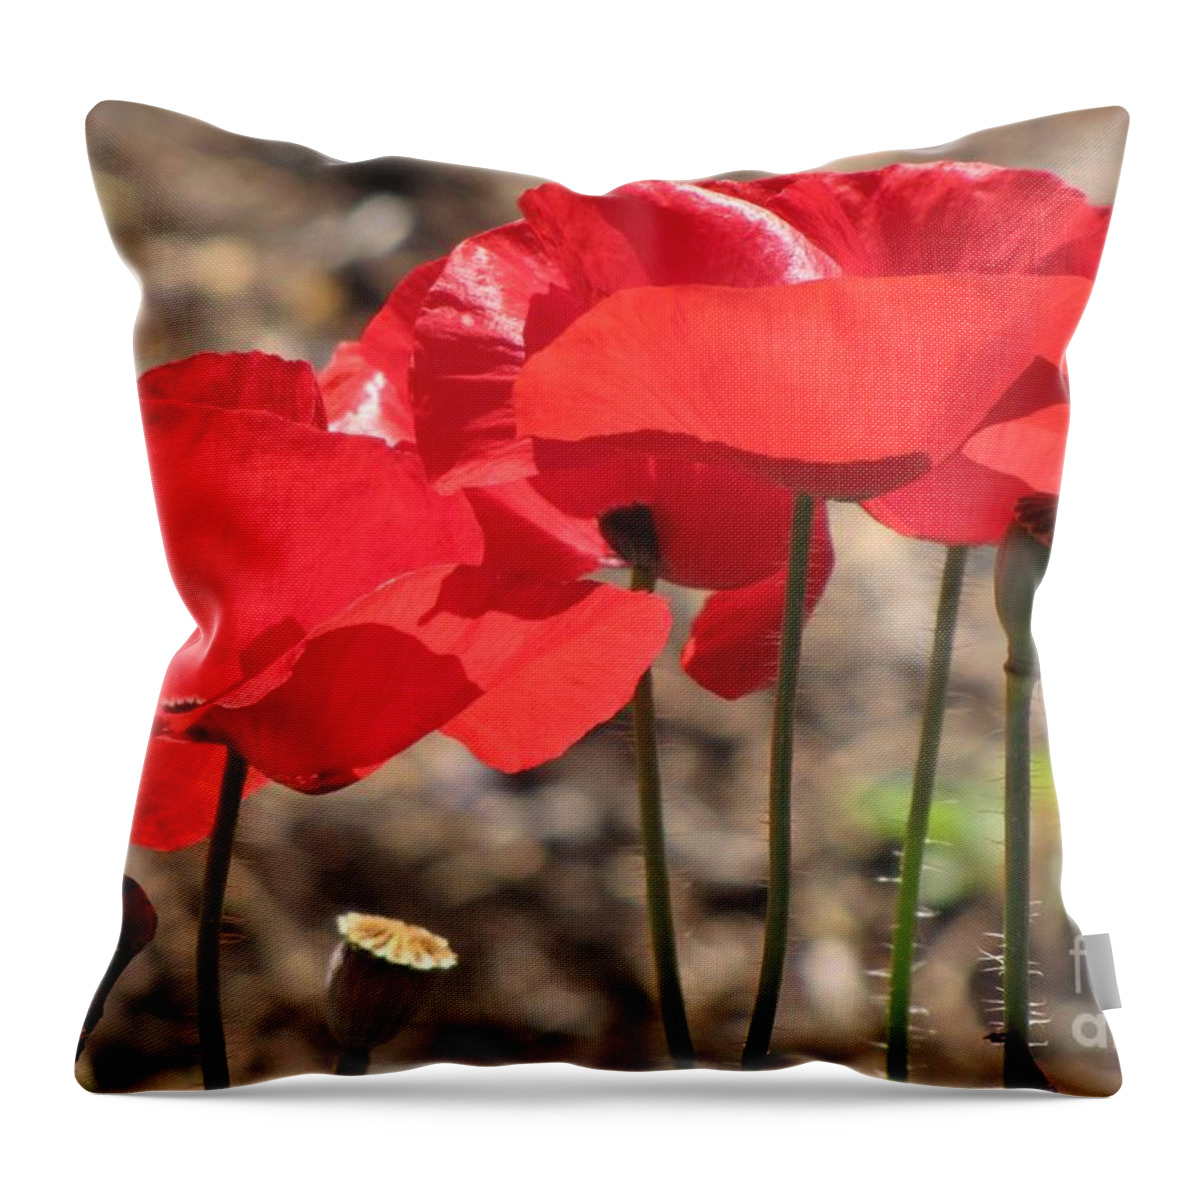 Red Corn Poppies Flowers Buds Seed Pods Throw Pillow featuring the photograph Corn Poppies by Michele Penner